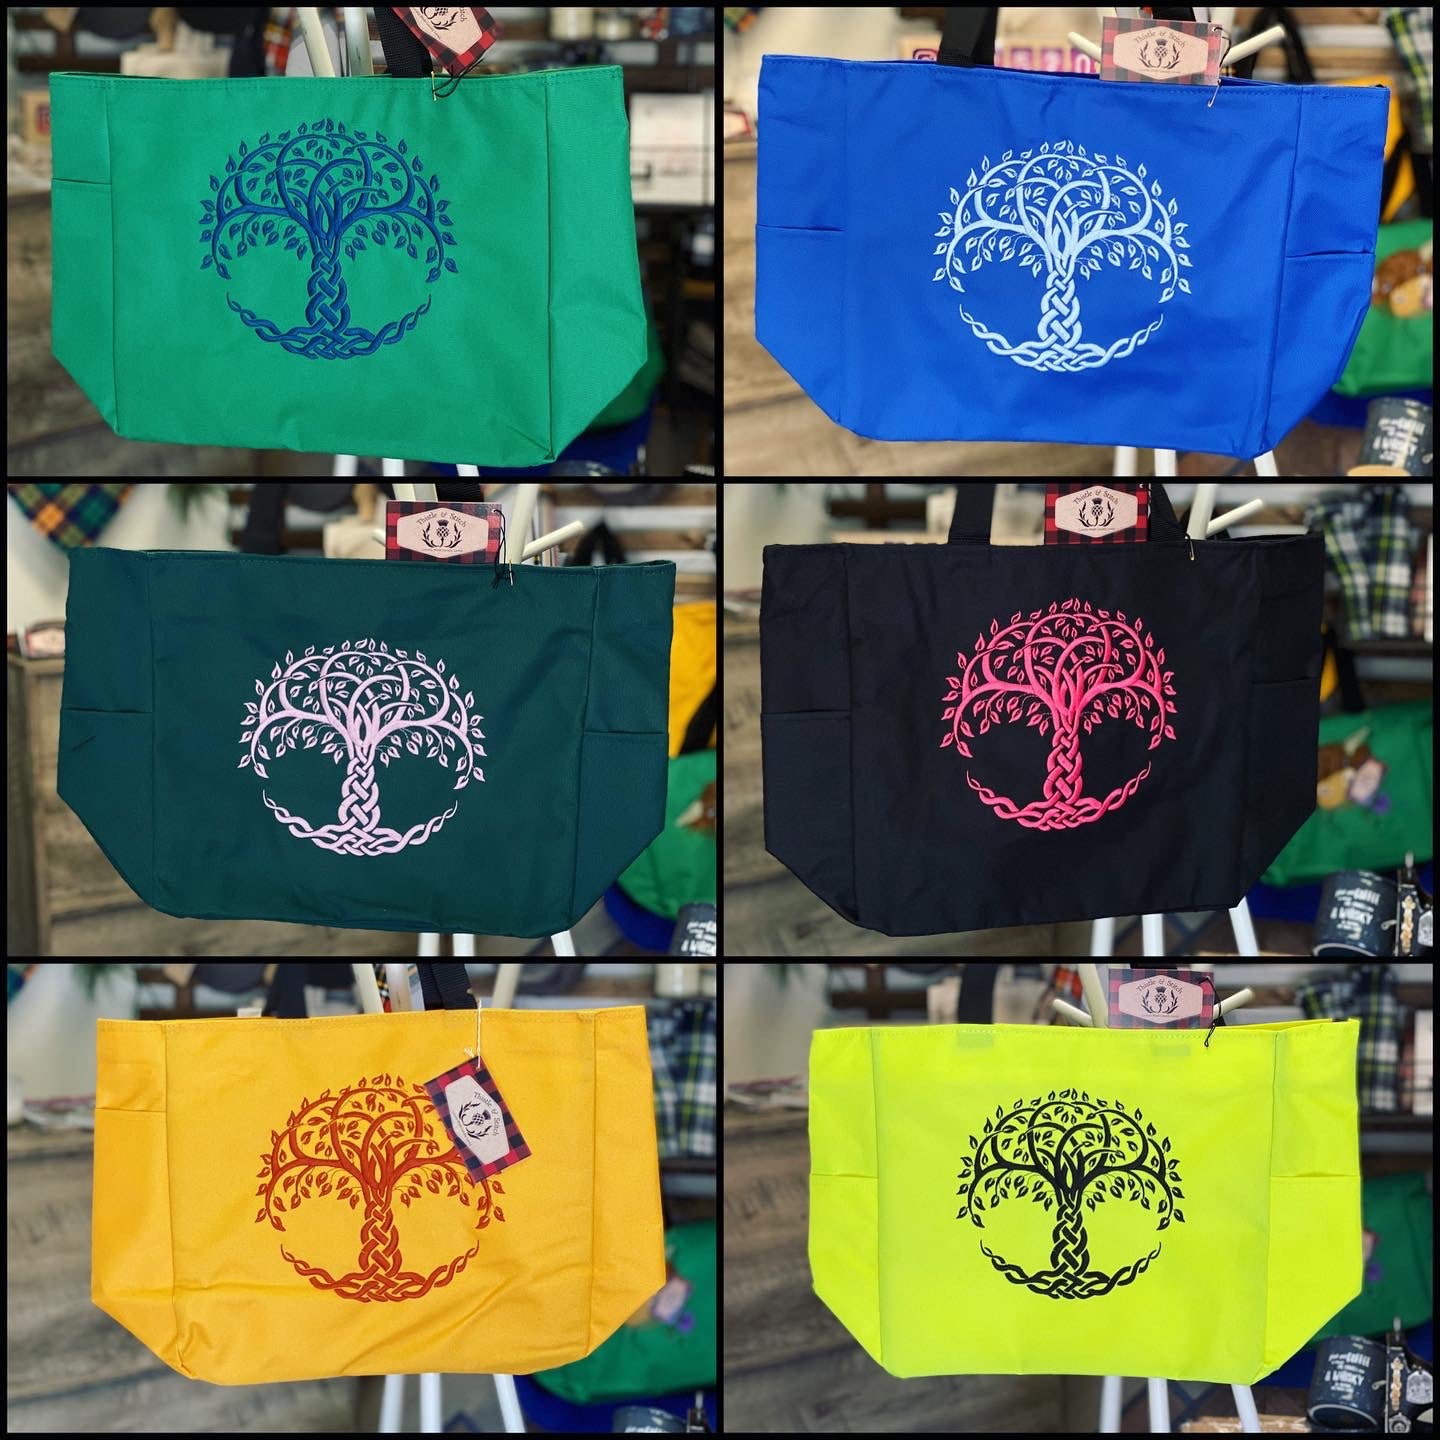 Celtic Knot Tree of Life Embroidered Tote Bag Custom Order Hundreds of Color Combinations